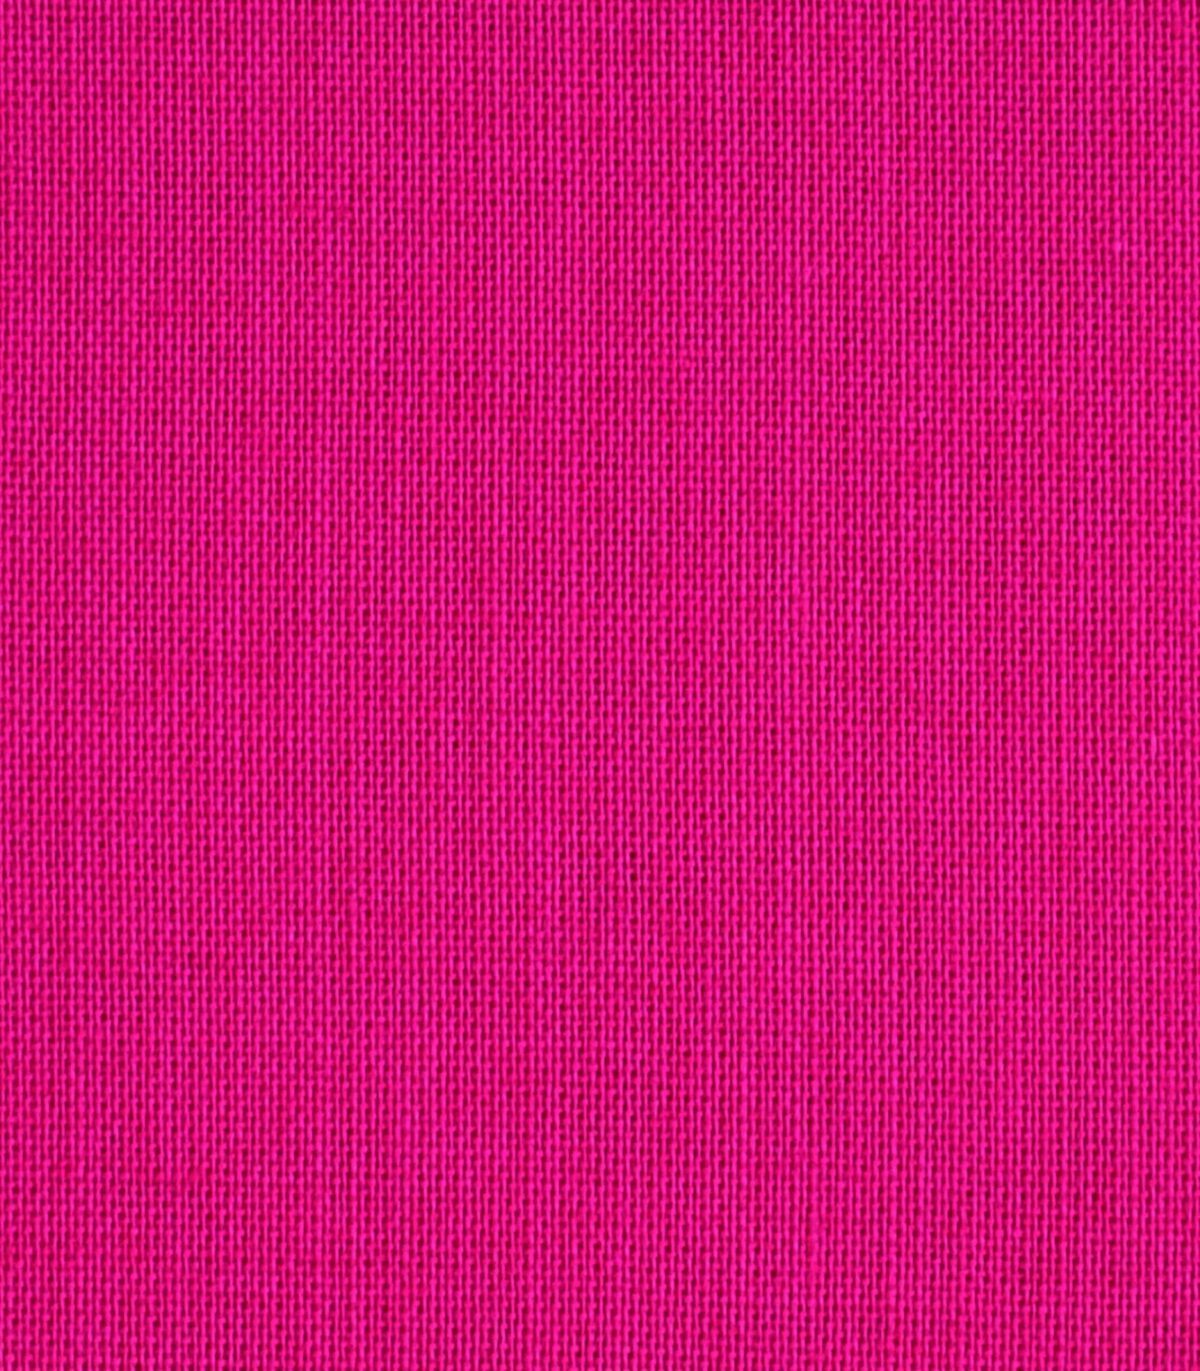 Cotton Dark Pink Color Solid Fabric